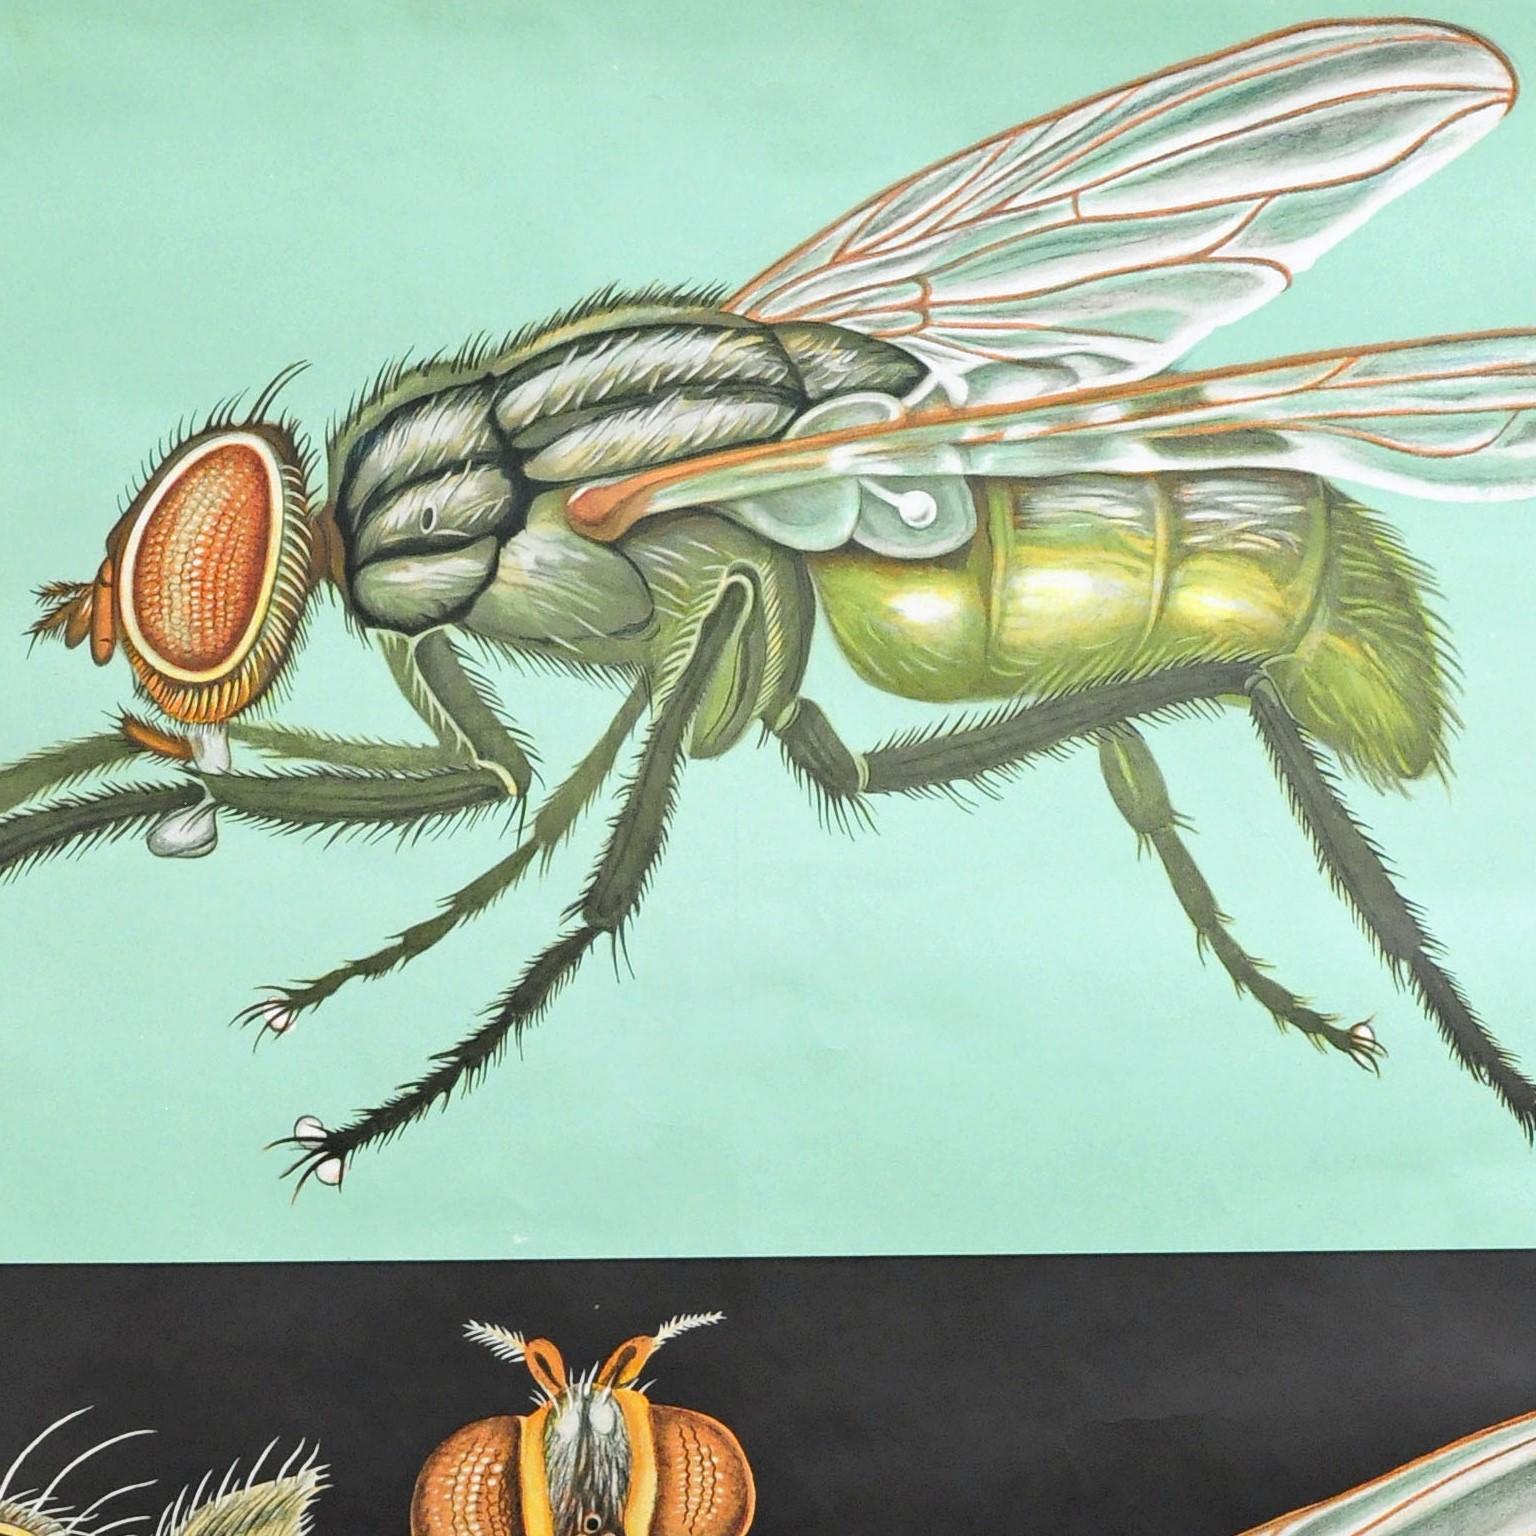 A pull-down Jung Koch Quentell wall chart showing the housefly - Musca domestica. Used as teaching material in German schools. Colorful print on paper reinforced with canvas. Published by Lehrmittelverlag Hagemann, Duesseldorf. Great vintage wall